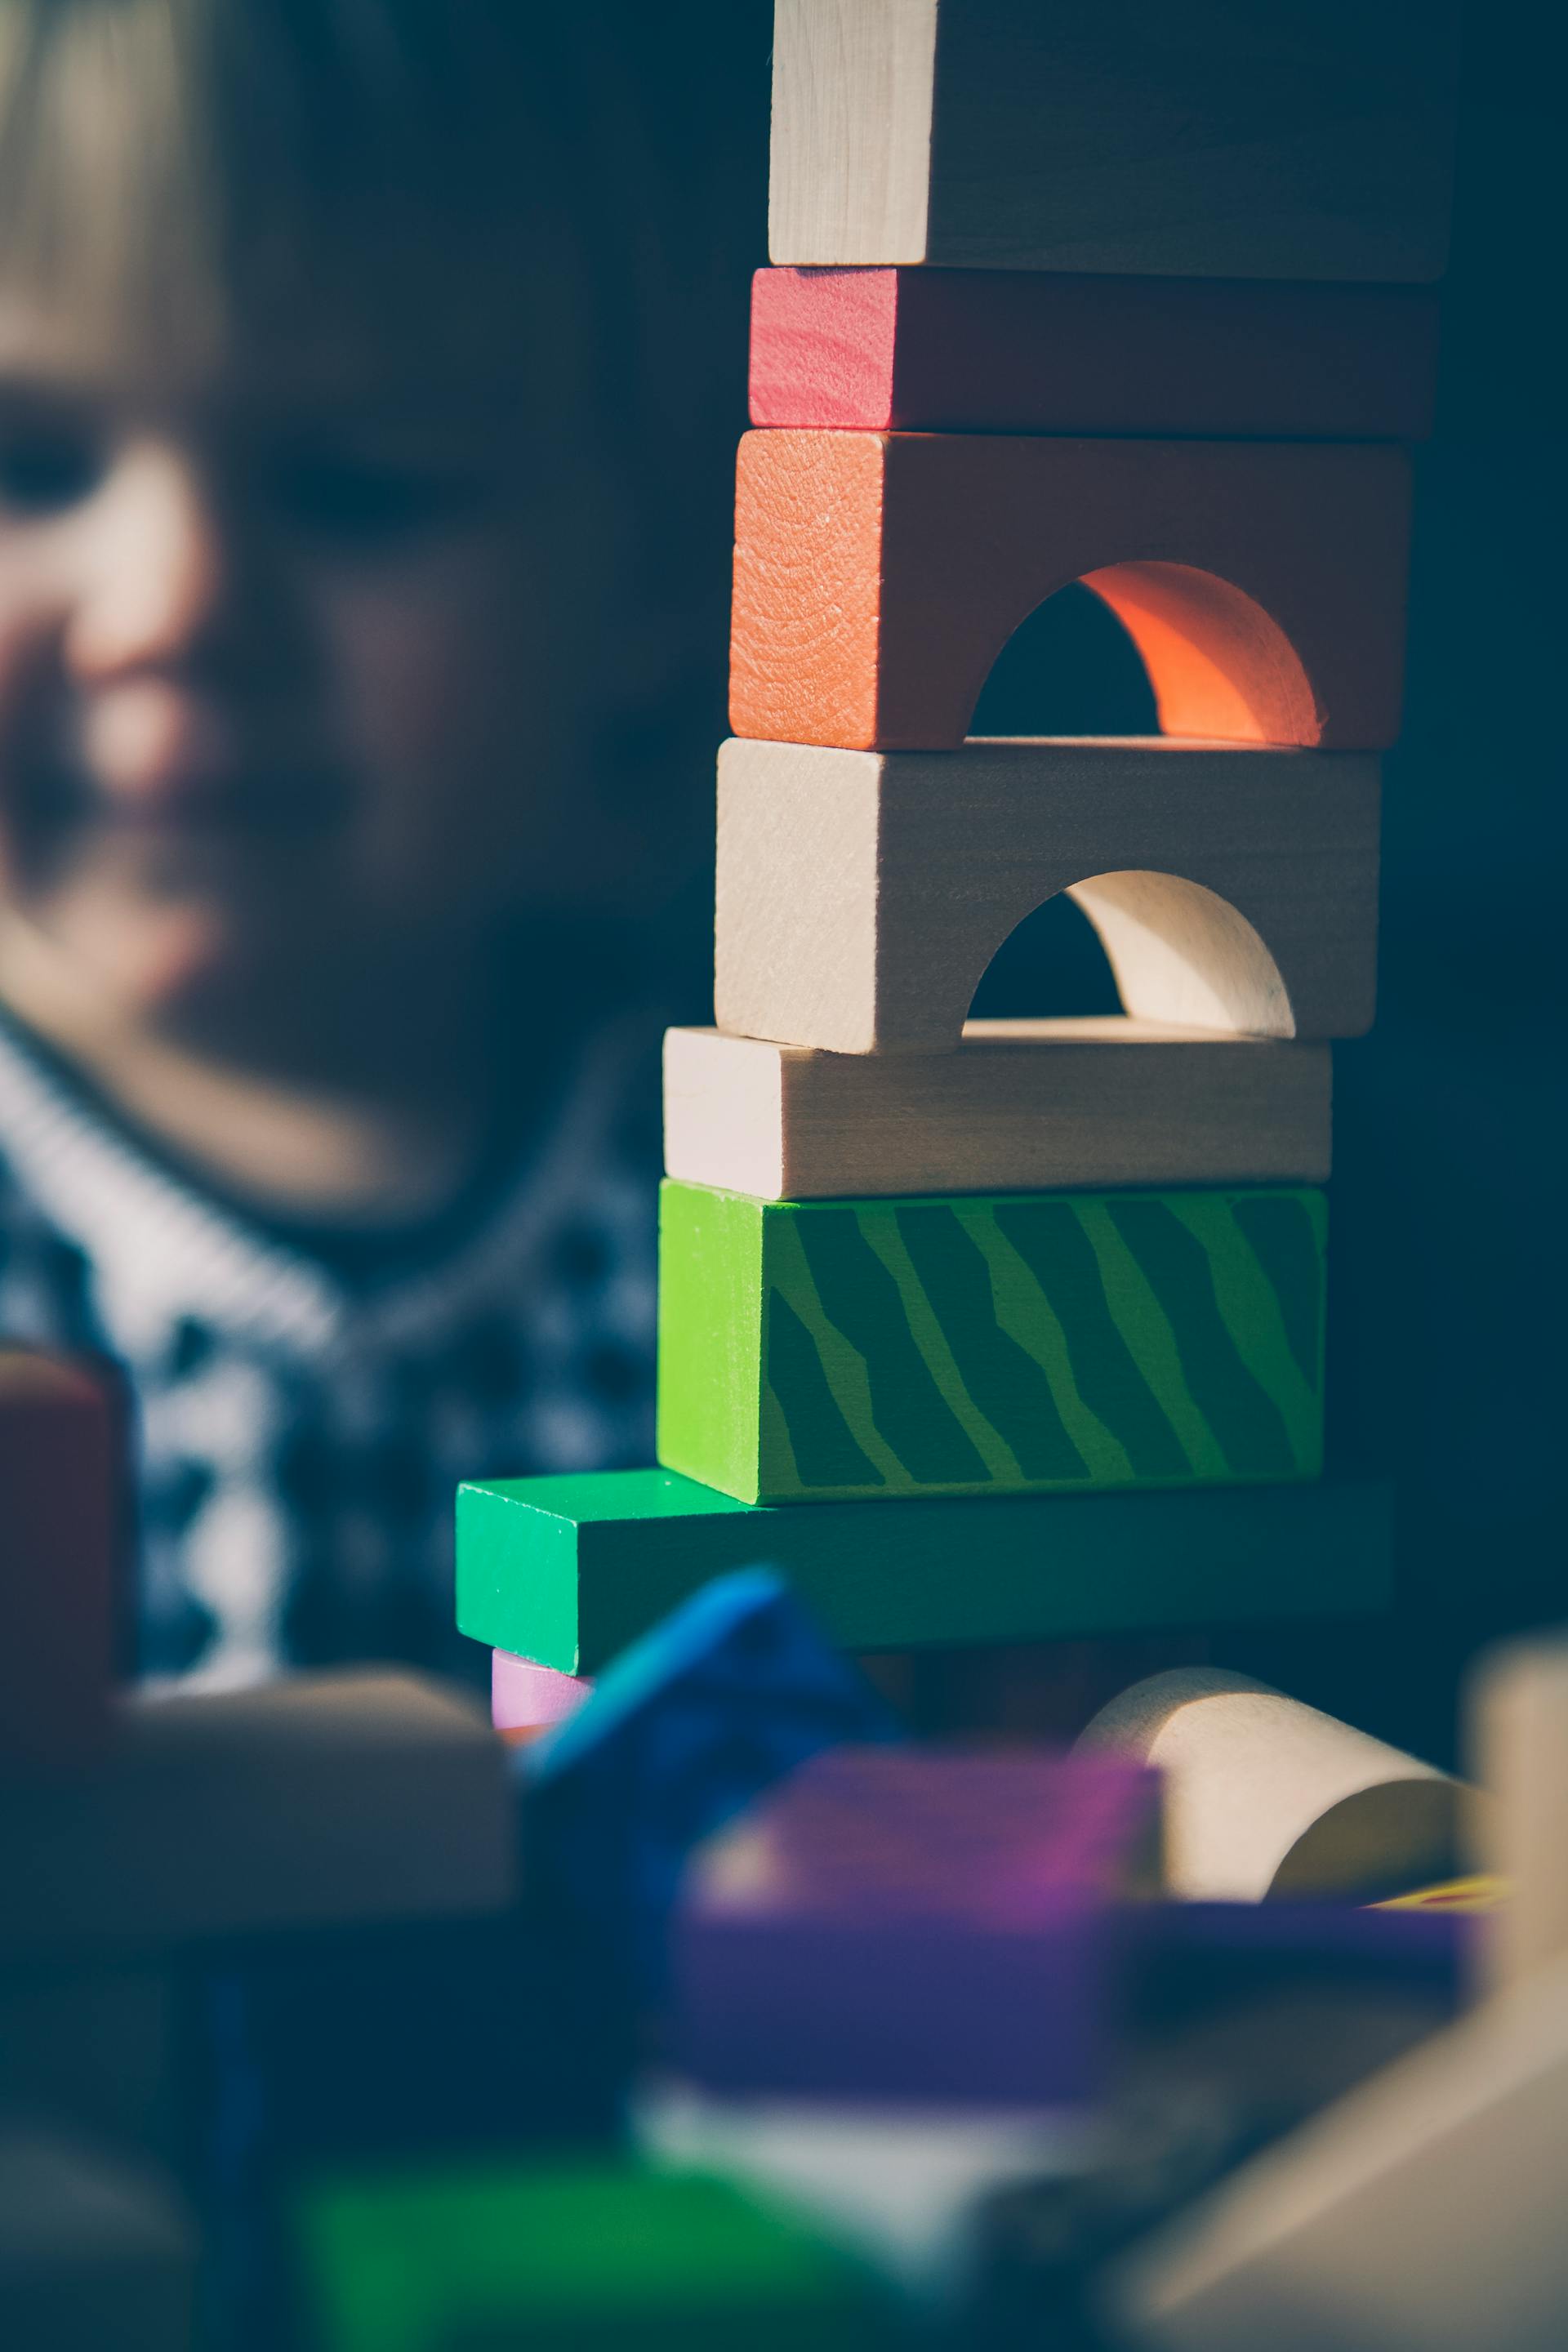 A child playing with colored blocks | Source: Pexels